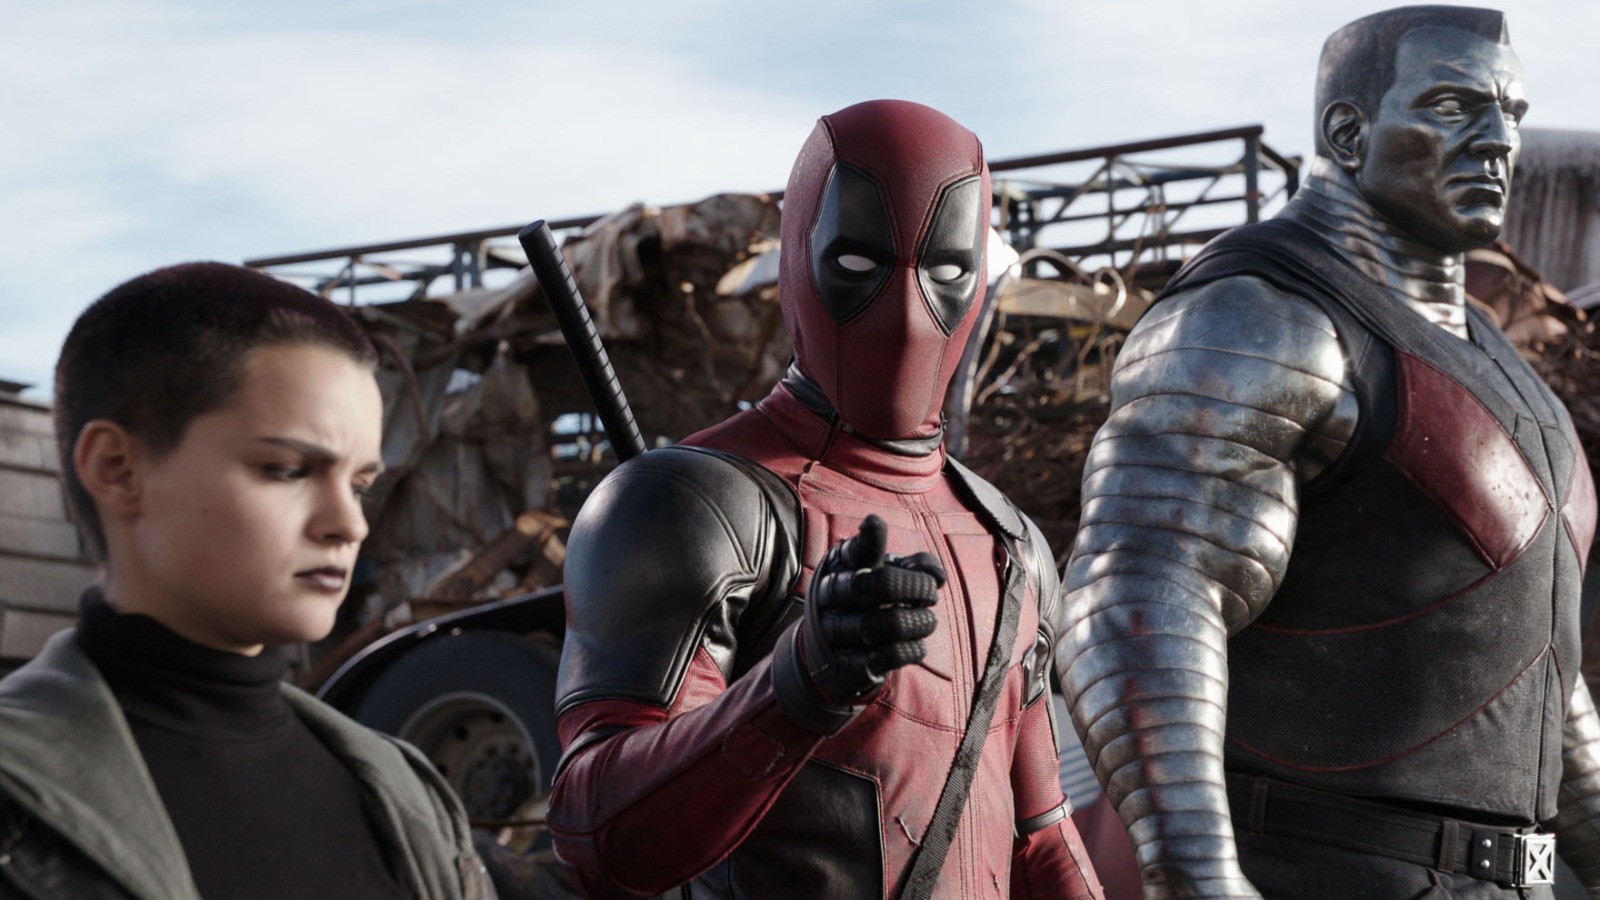 Deadpool 3 Confirmed to Be Very Much a Part of the MCU